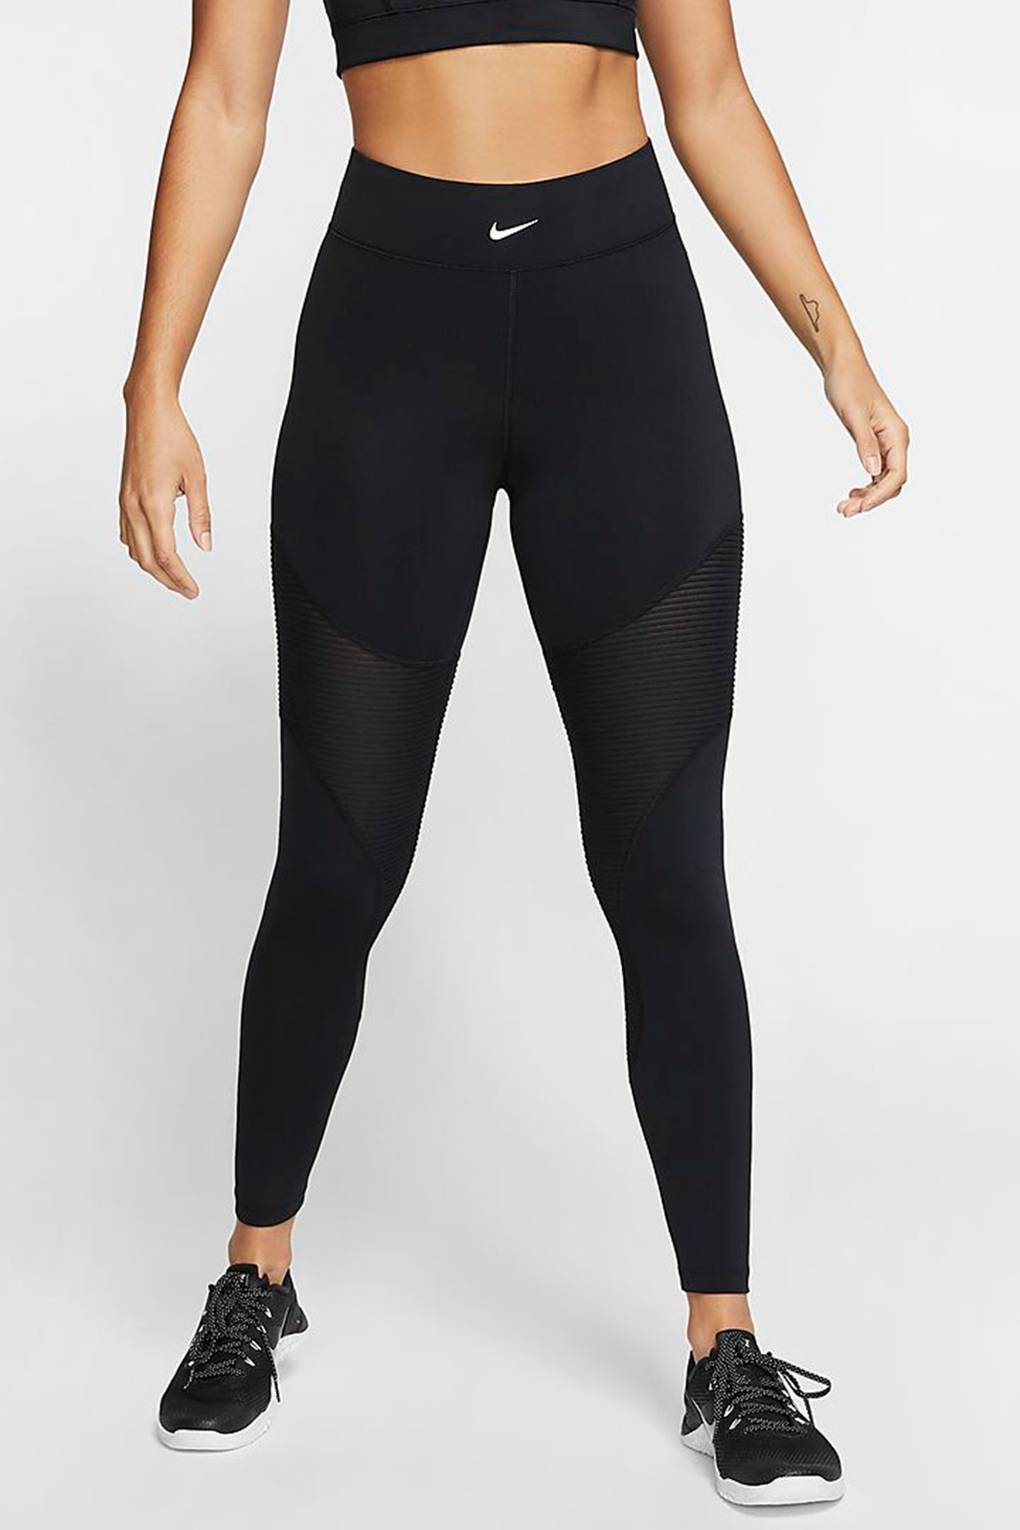 15 Best Maternity Gym Leggings For All Stages Of Pregnancy | Glamour UK